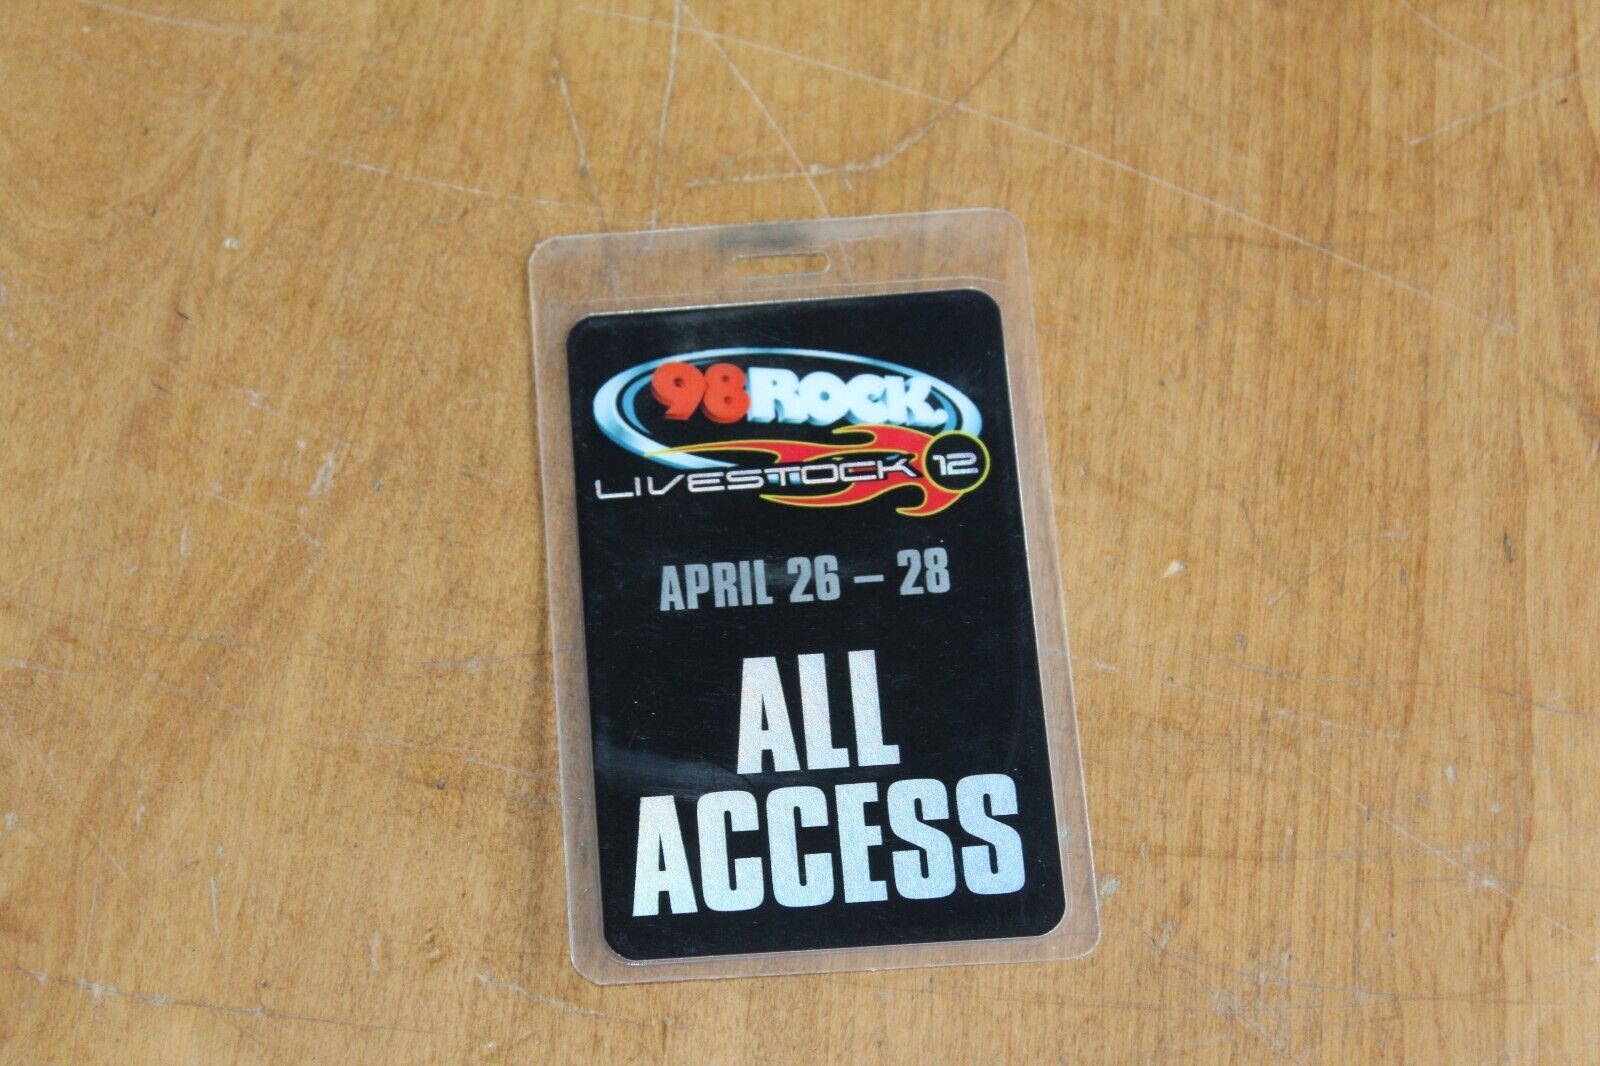 Puddle Of Mud Kid Rock Rob Zombie Thirty Seconds To Mars  Backstage Pass